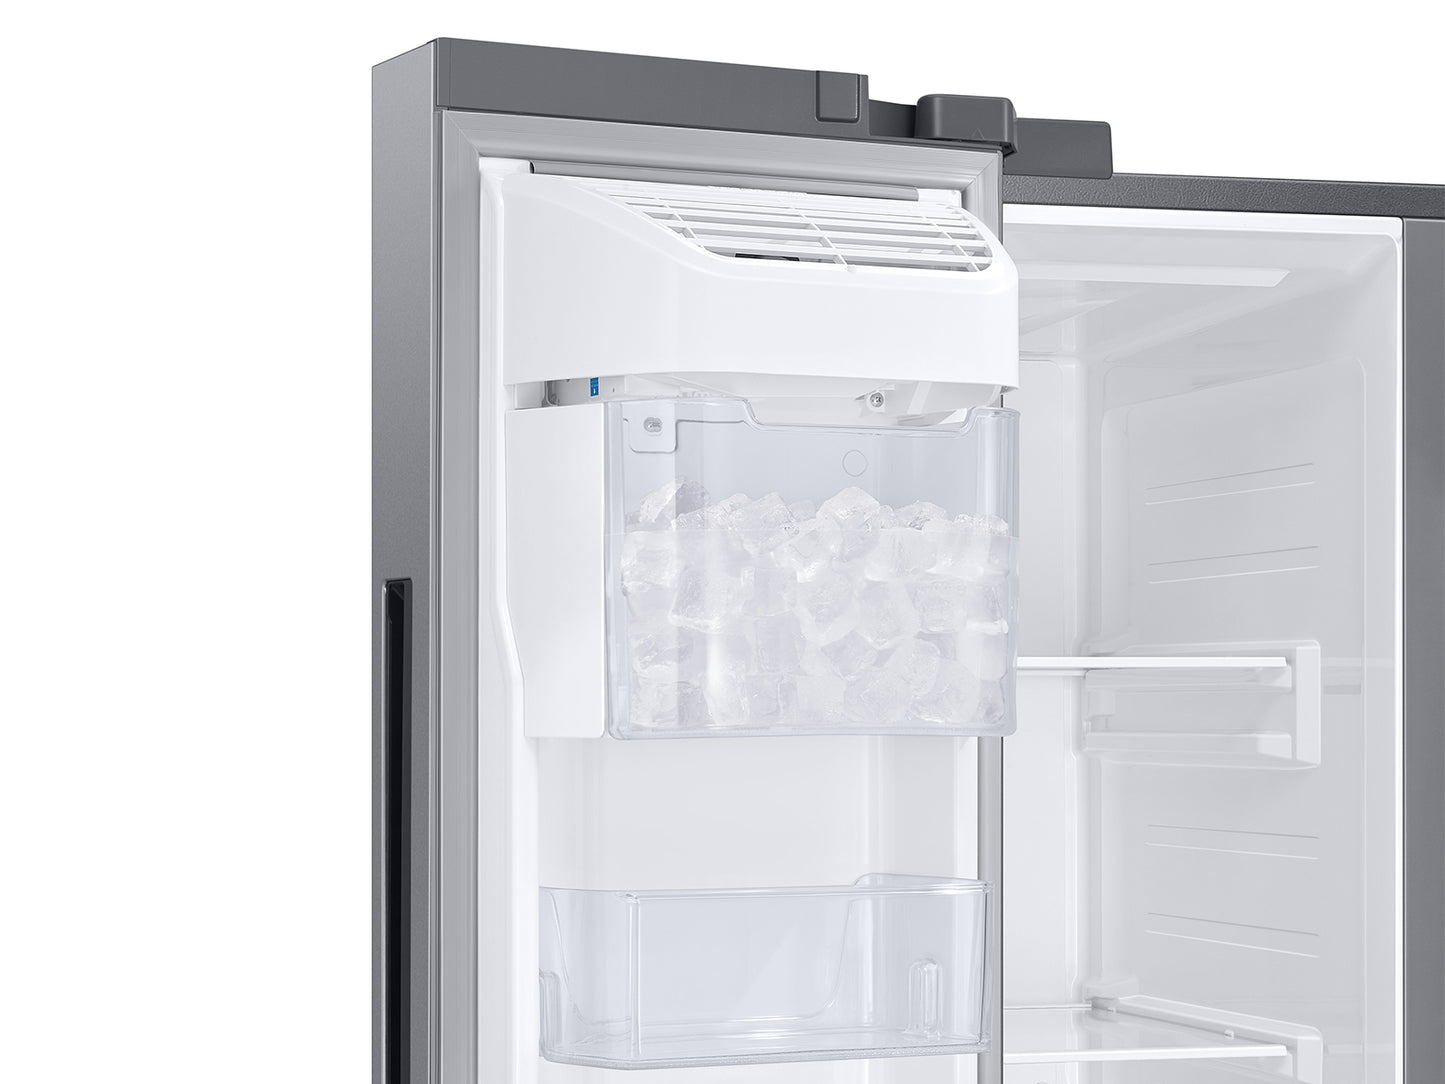 Samsung 28 cu. ft. Smart Side-by-Side Refrigerator in Stainless Steel (has dents)